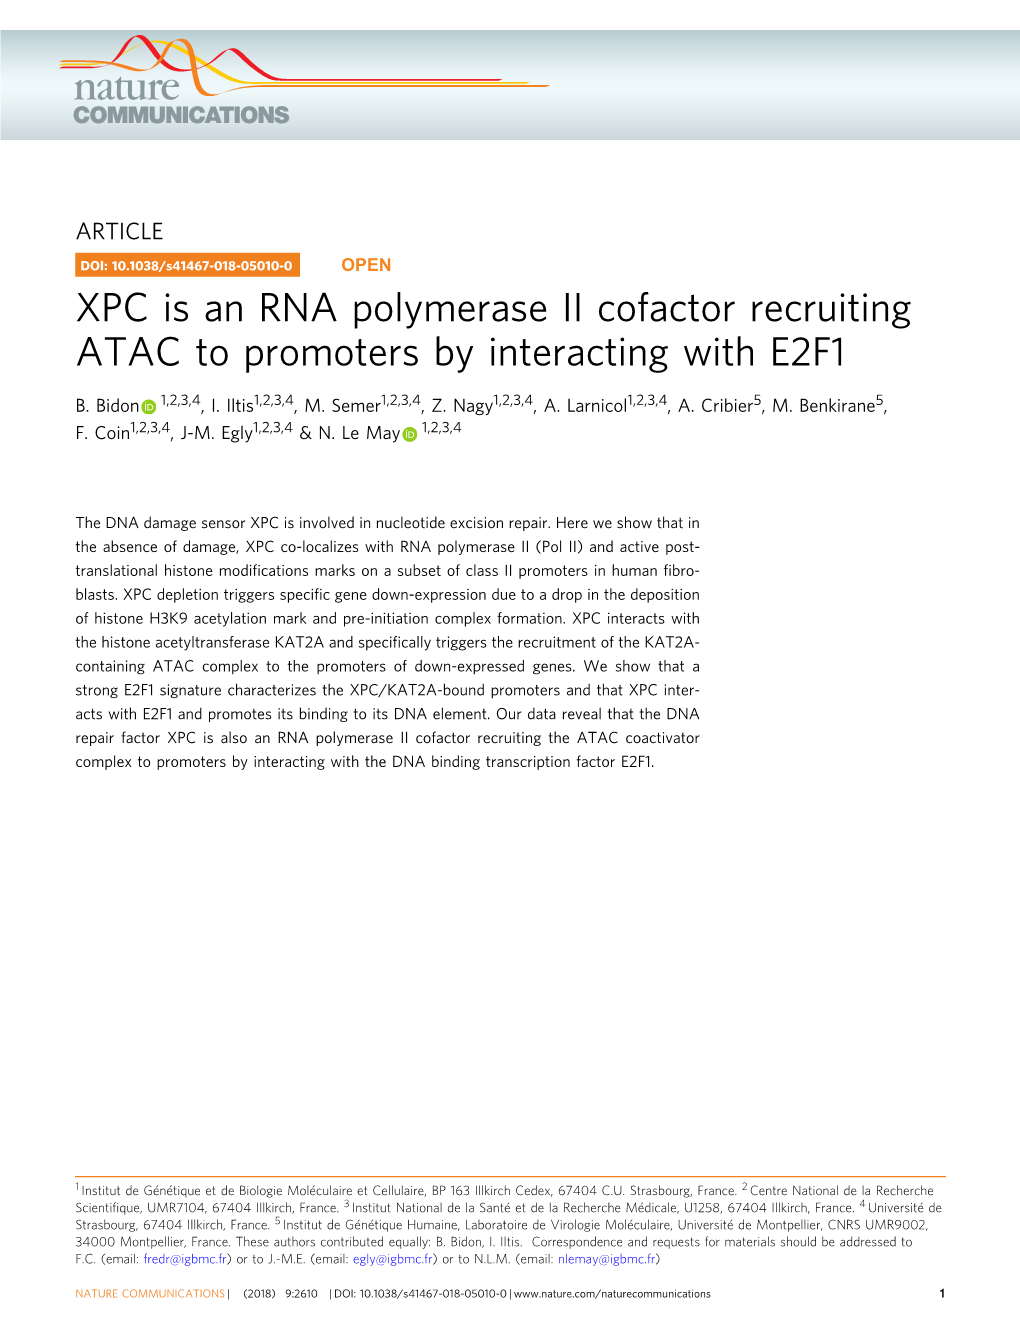 XPC Is an RNA Polymerase II Cofactor Recruiting ATAC to Promoters by Interacting with E2F1